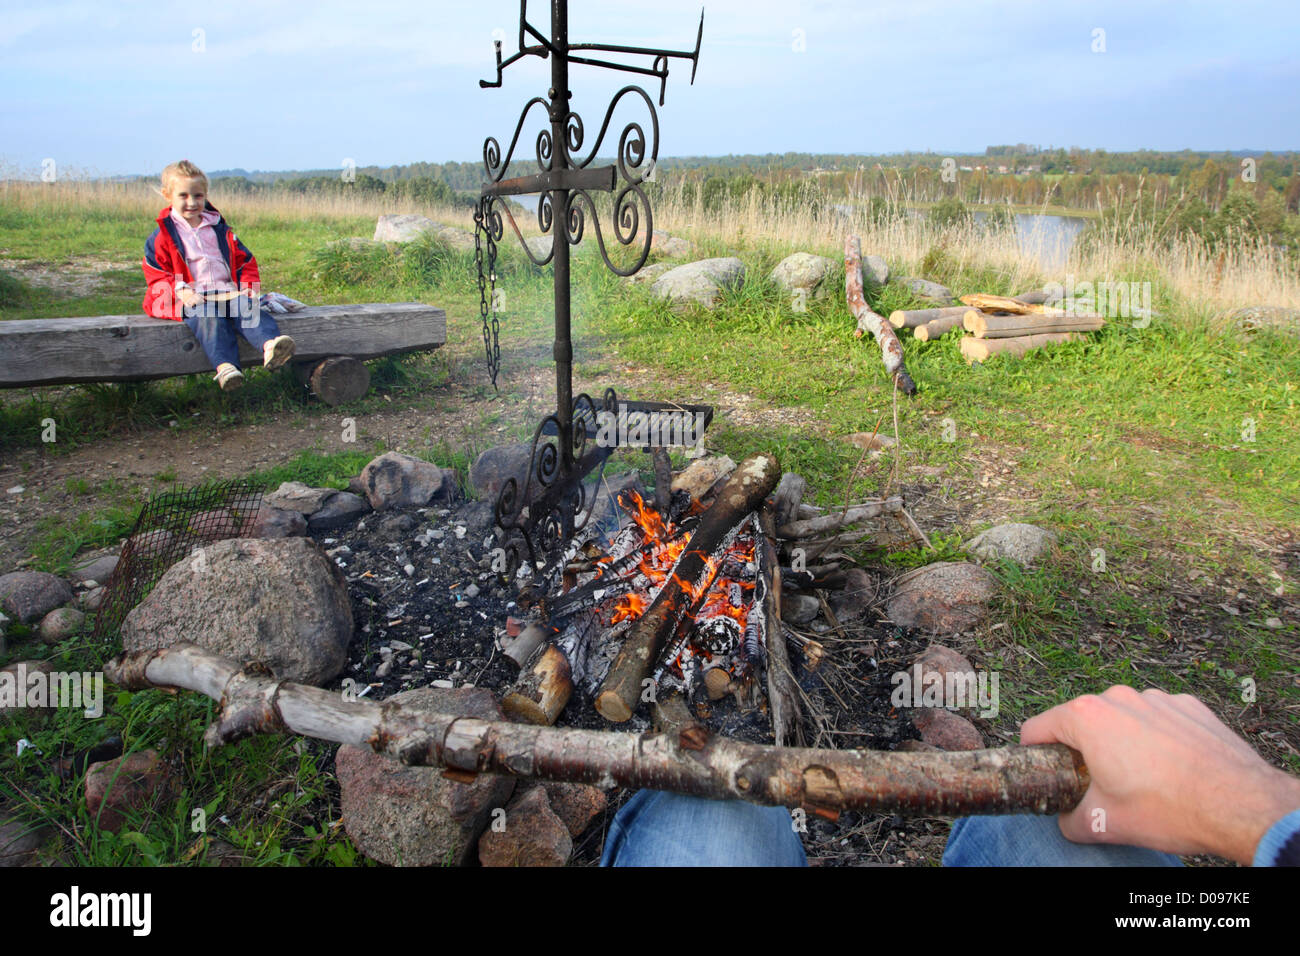 Dad sitting with his child around the open fire, getting ready for outdoor cooking. Stock Photo